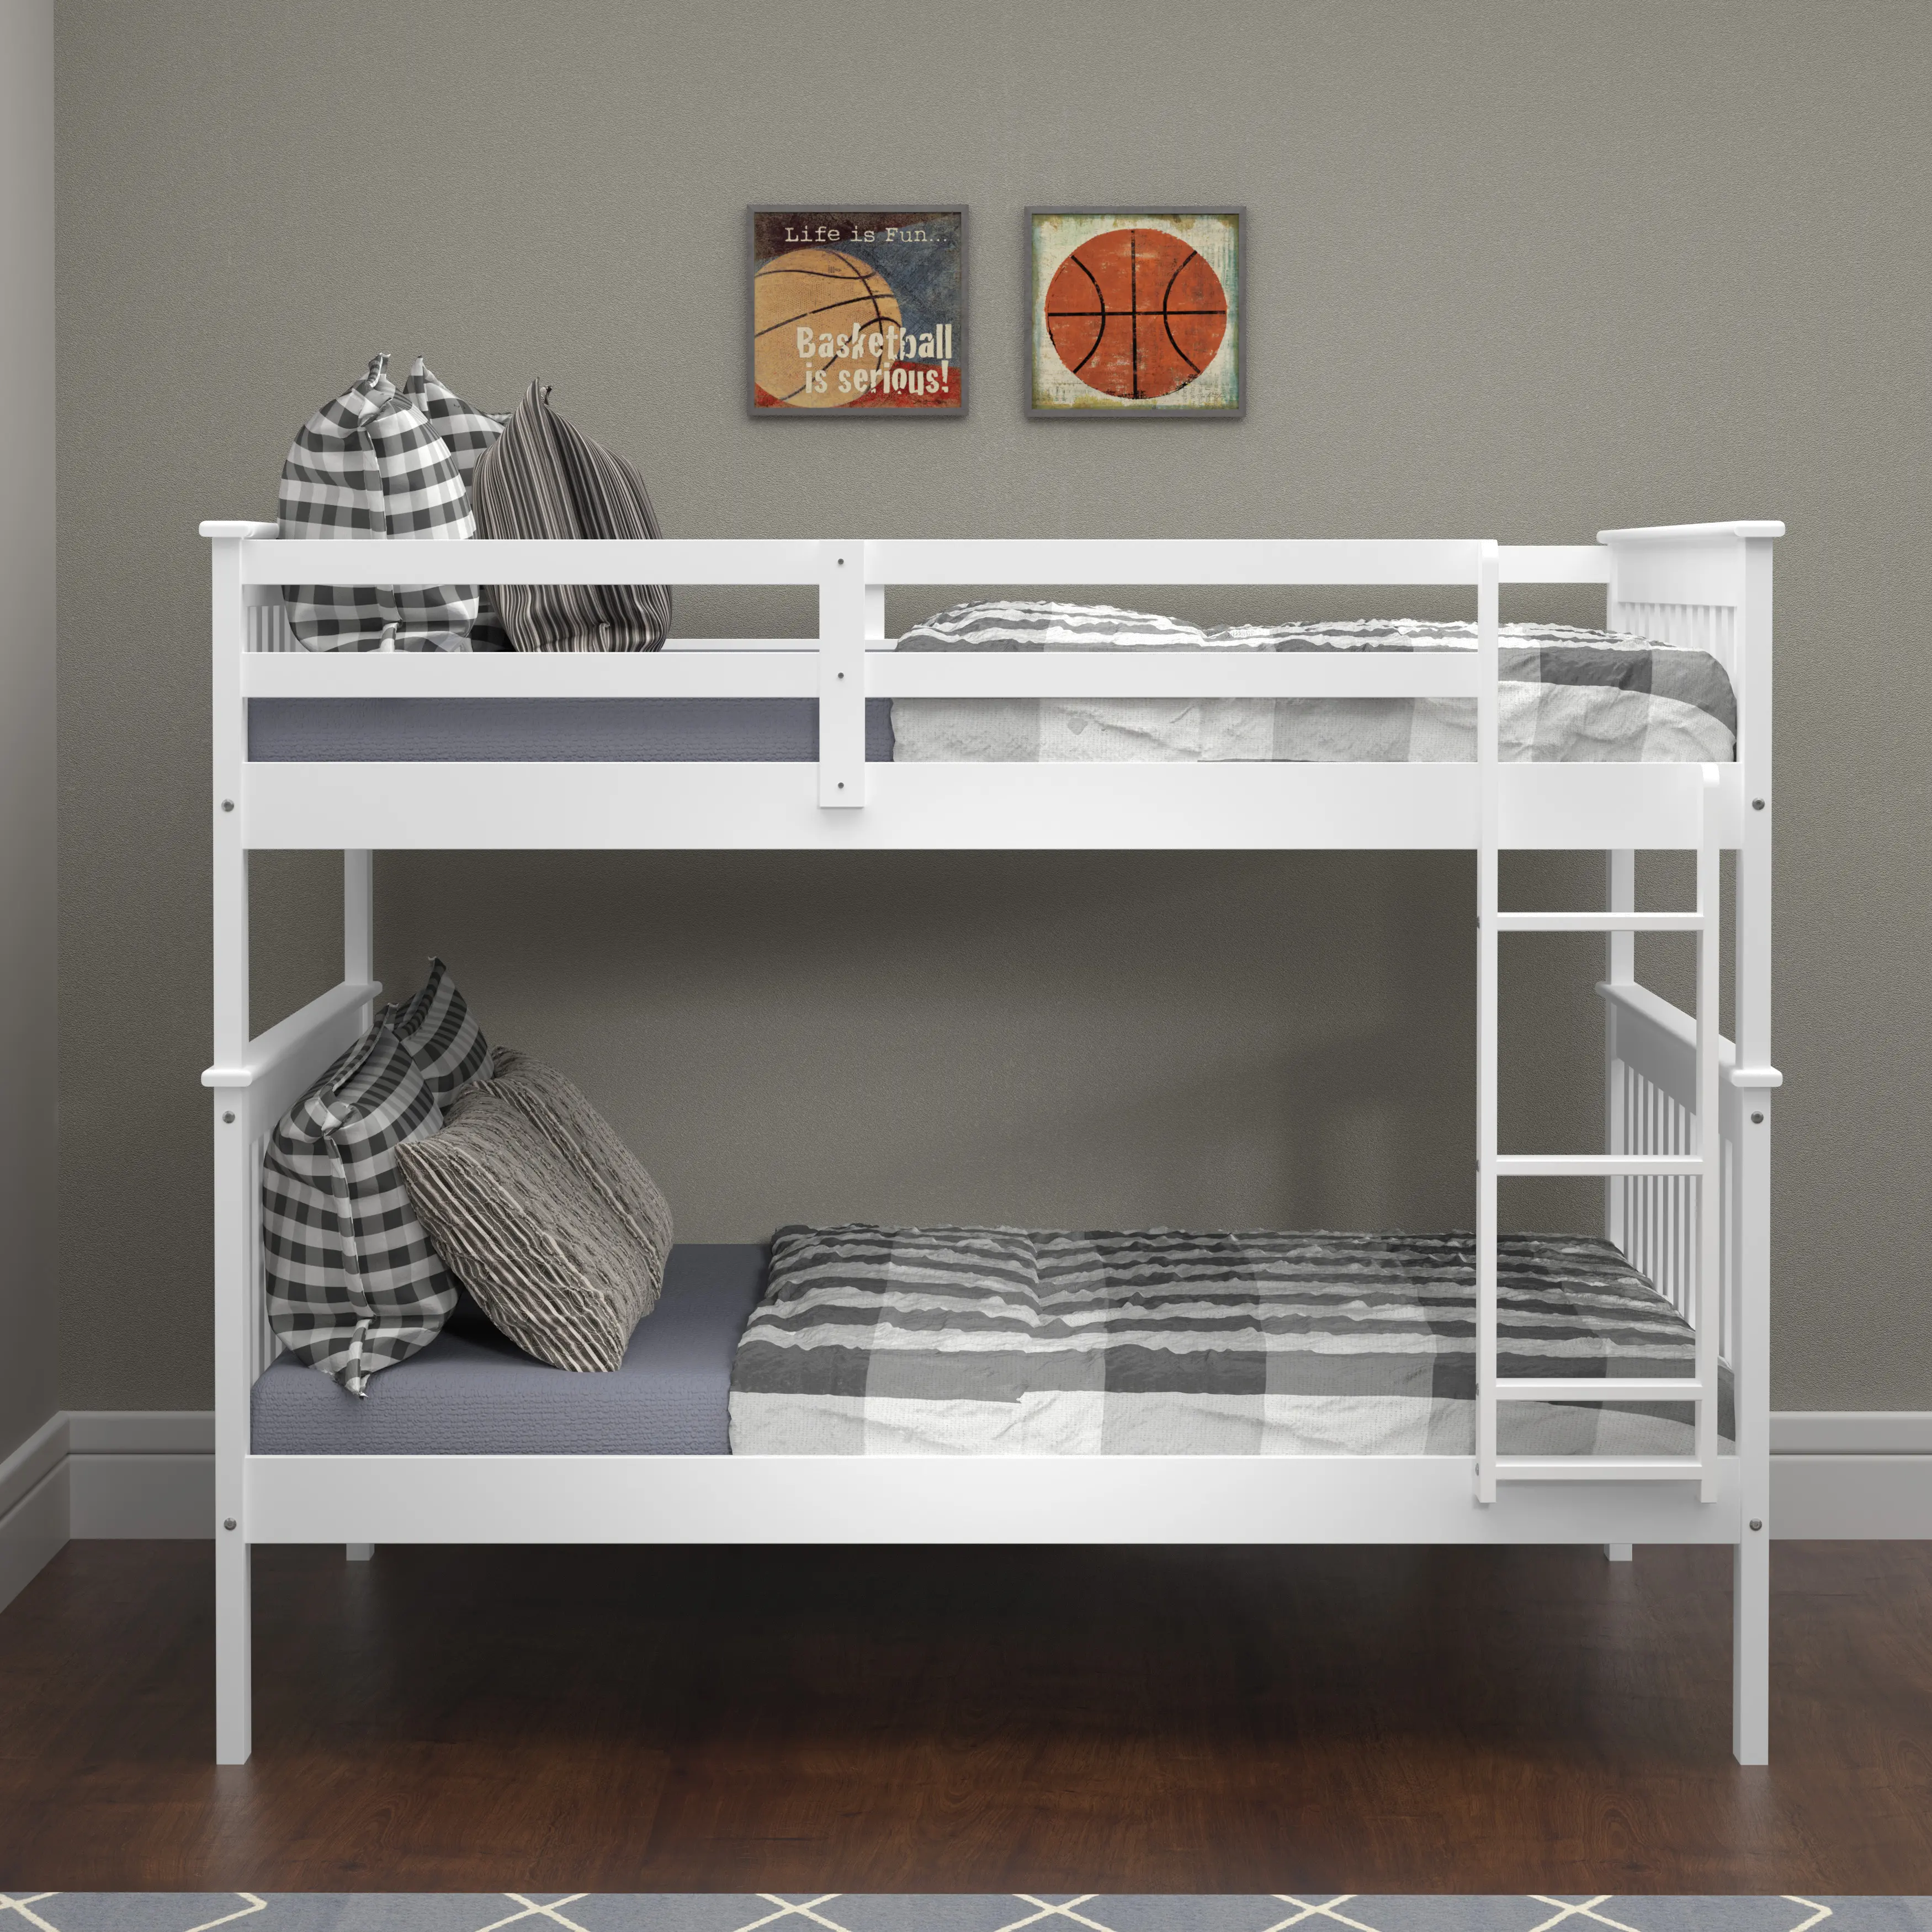 123-3-FFW Mission White Full-over-Full Bunk Bed - Craftsman sku 123-3-FFW